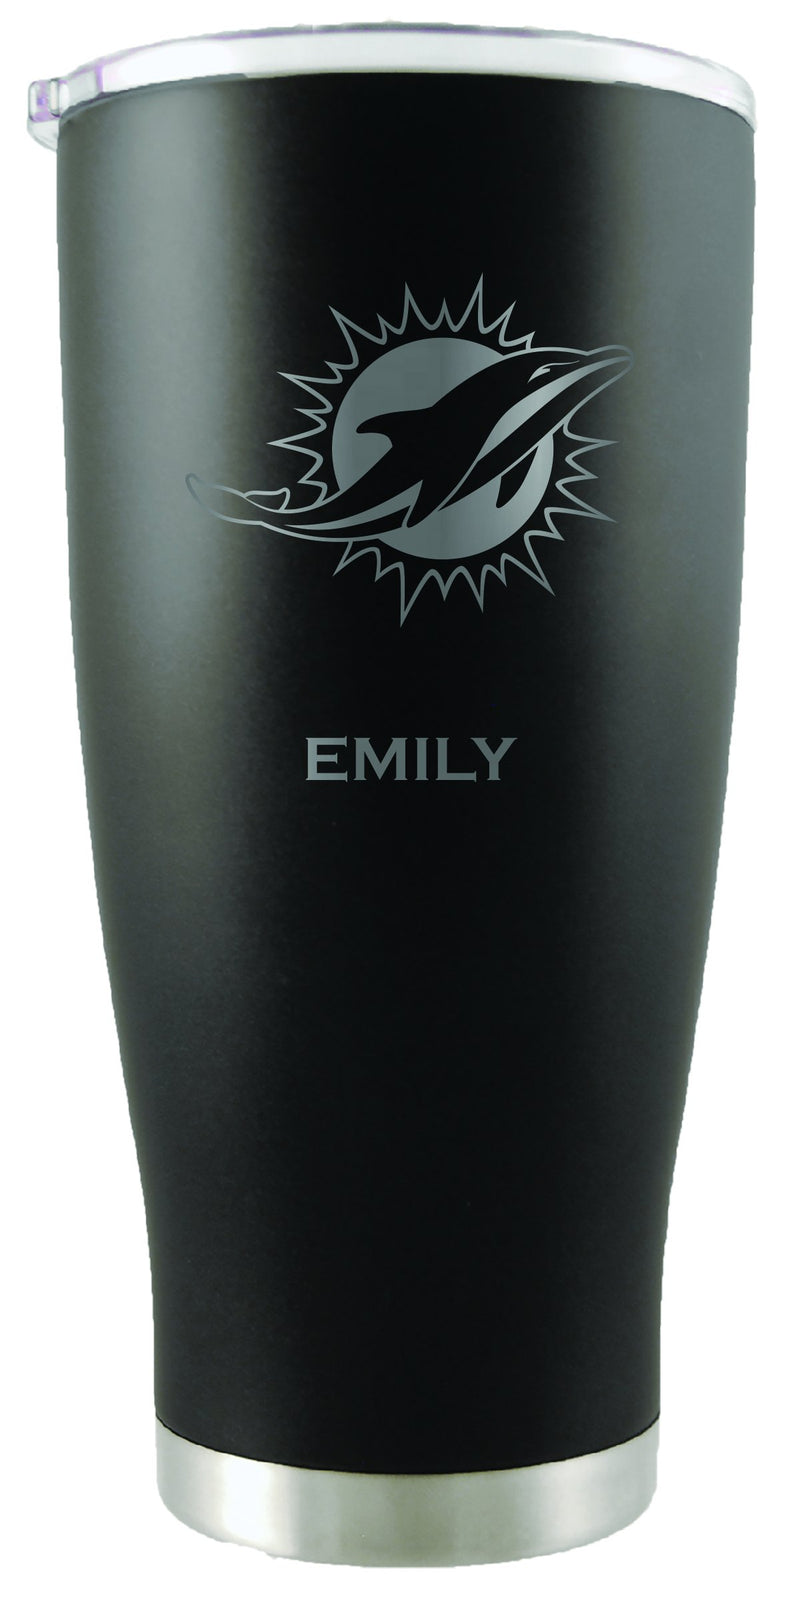 20oz Black Personalized Stainless Steel Tumbler | Miami Dolphins
CurrentProduct, Drinkware_category_All, MIA, Miami Dolphins, NFL, Personalized_Personalized, Stainless Steel
The Memory Company